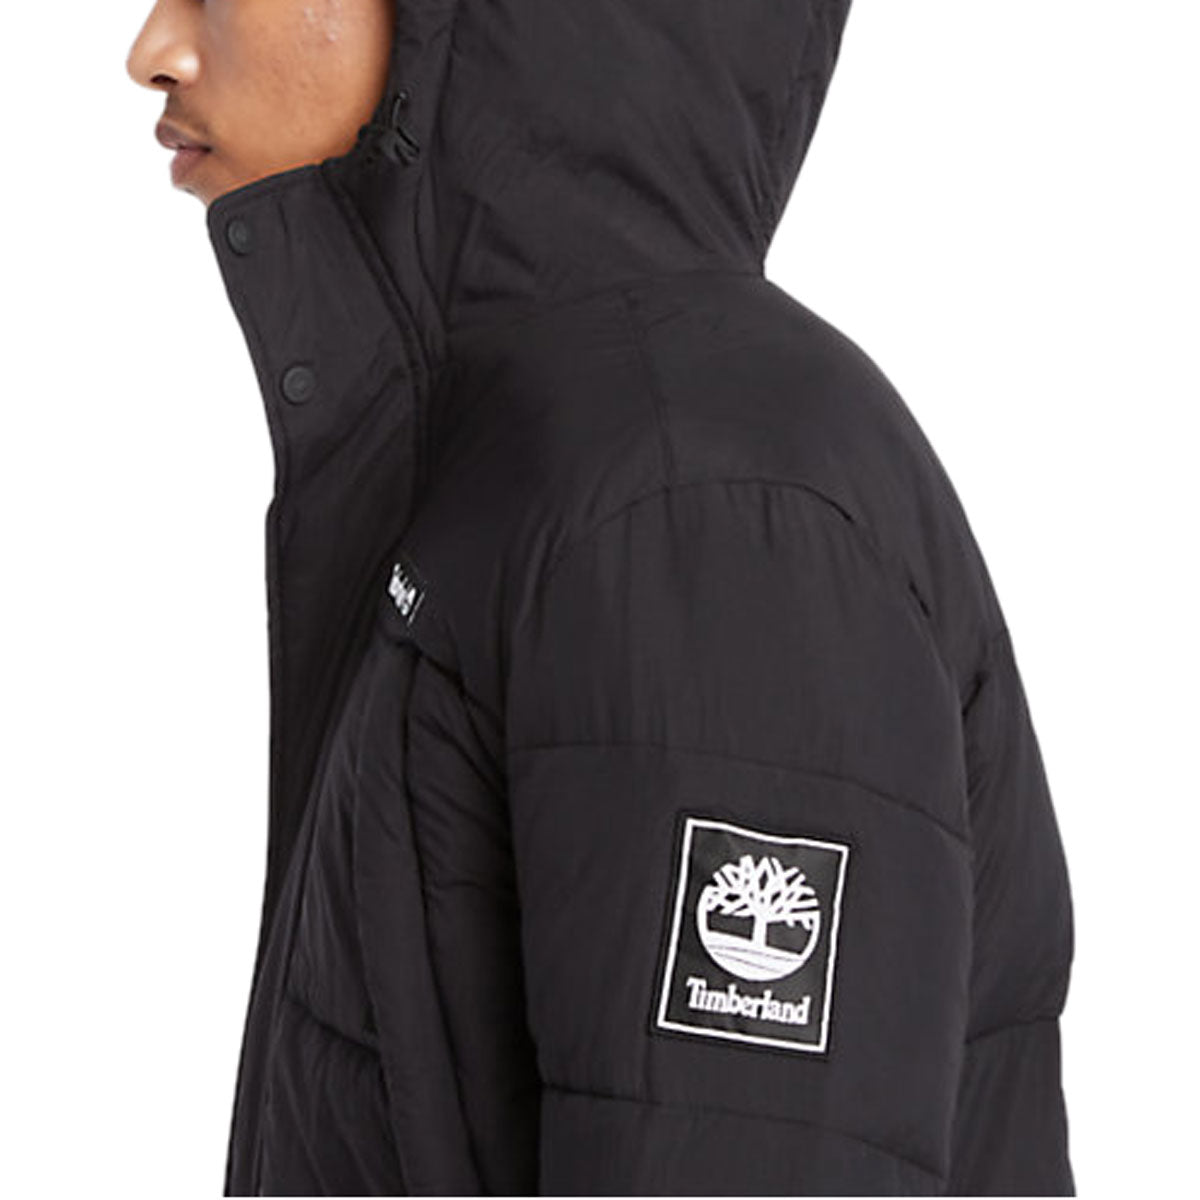 Timberland DWR Outdoor Archive Puffer Jacket - Black image 4